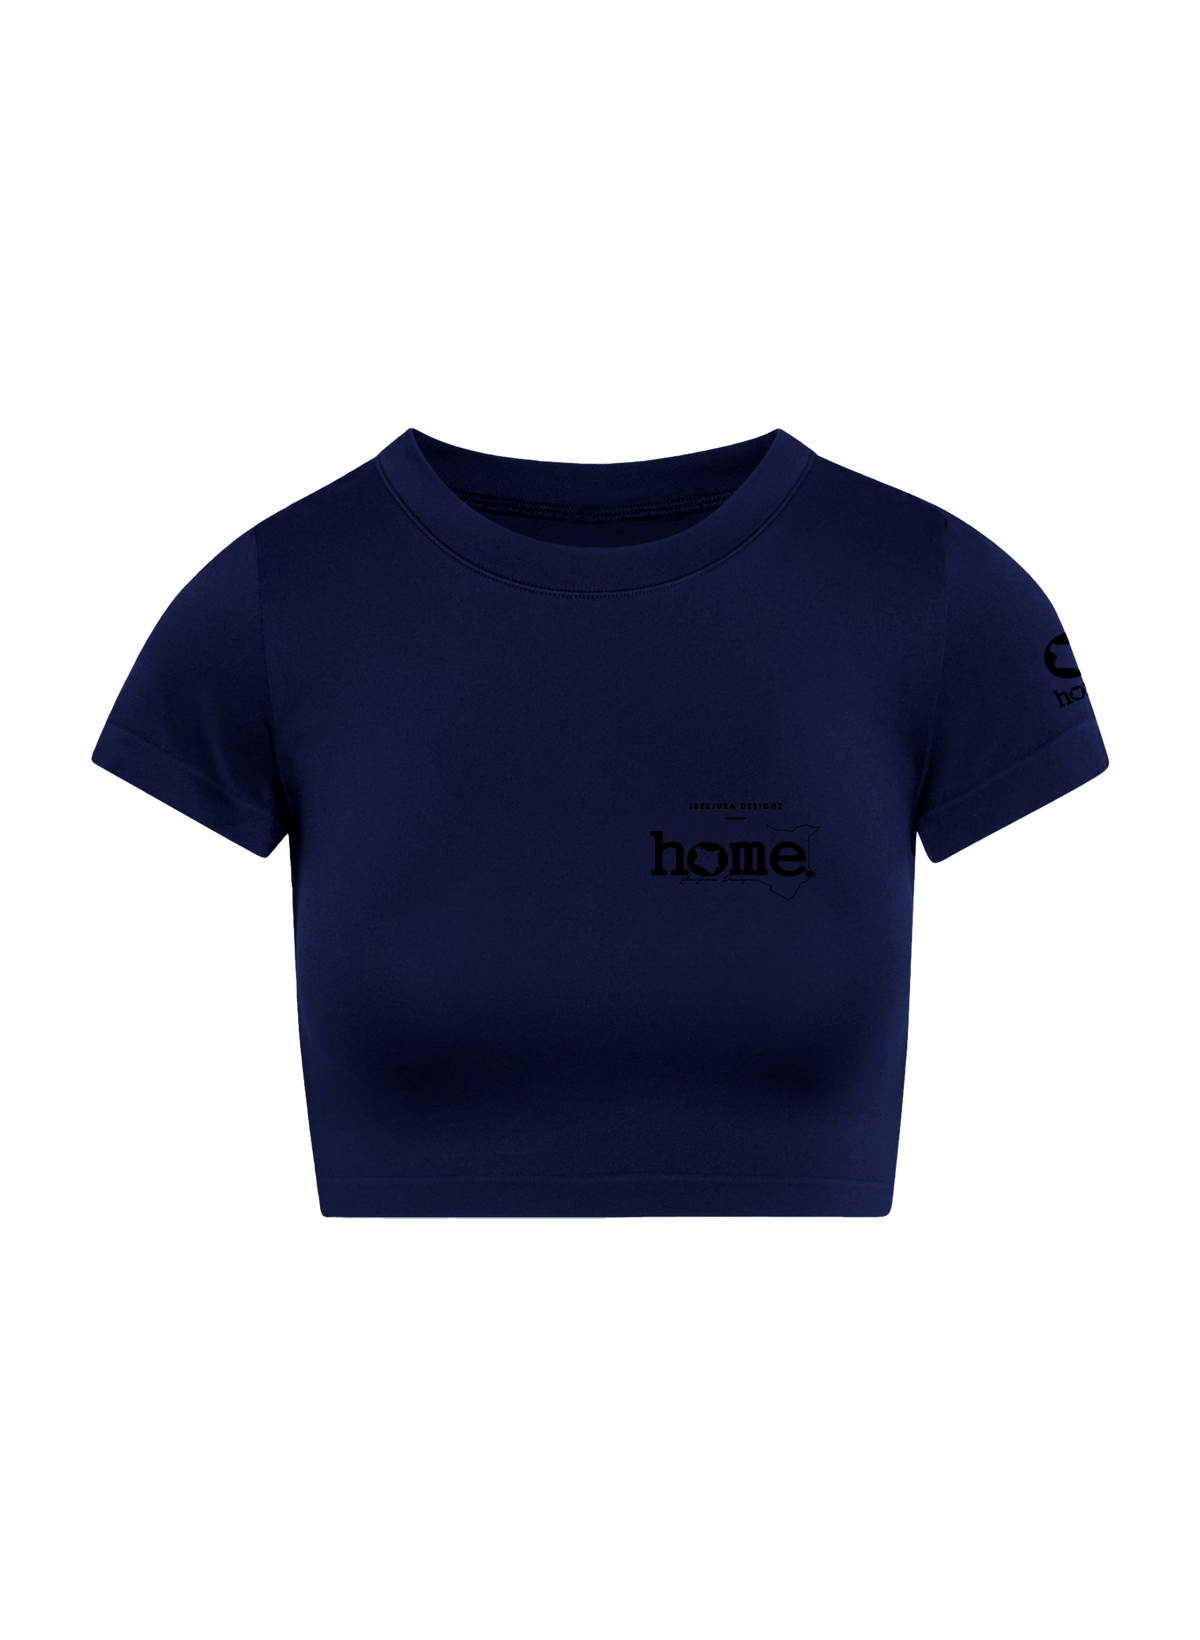 home_254 SHORT SLEEVED NAVY-BLUE CROPPED ARIA TEE WITH A BLACK 3D WORDS PRINT 